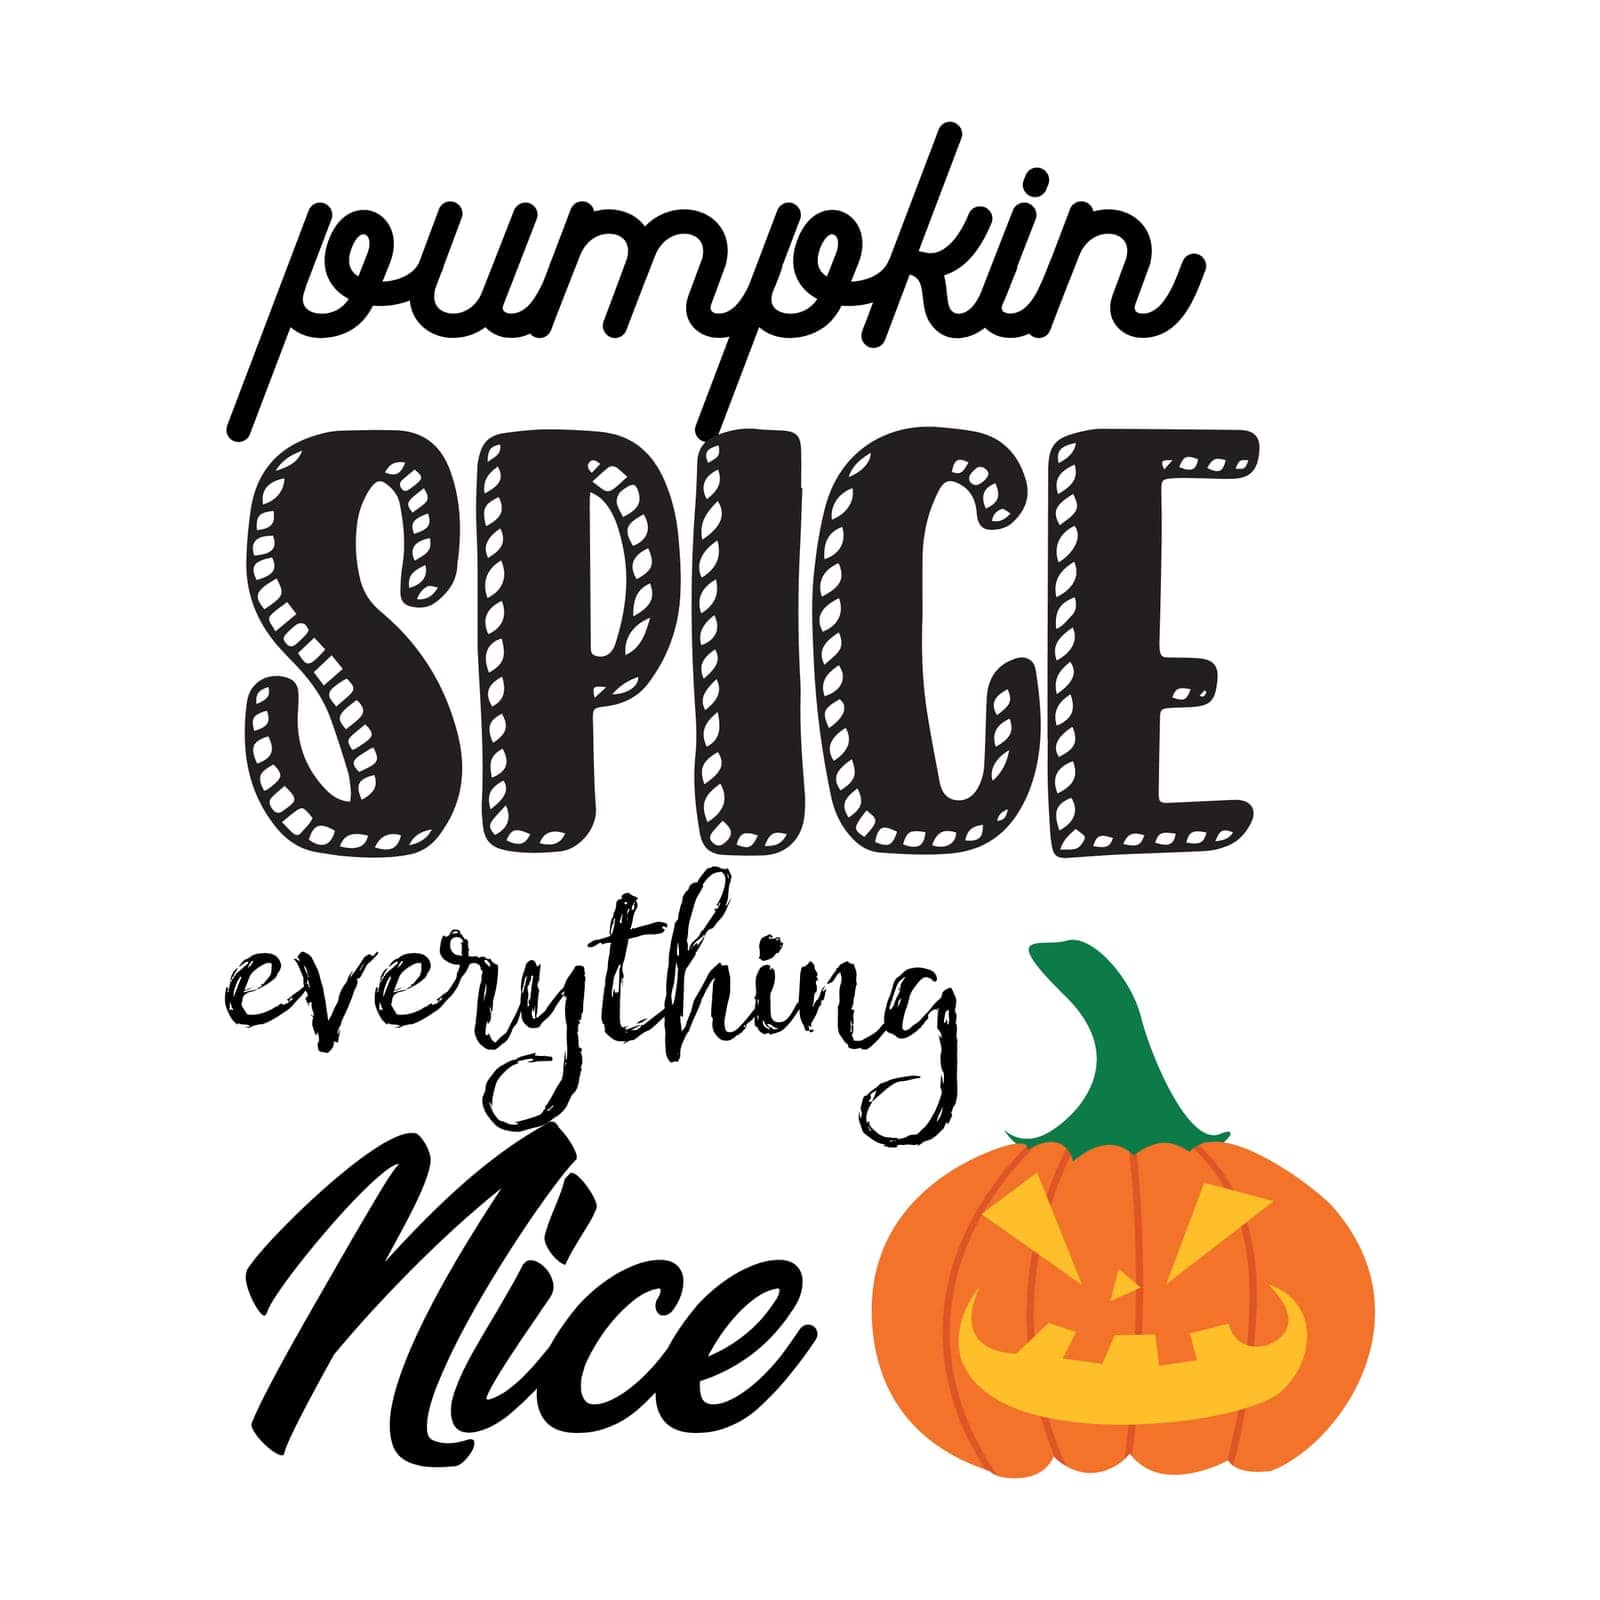 Pumpkin Spice Everything Nice inscription by Dustick